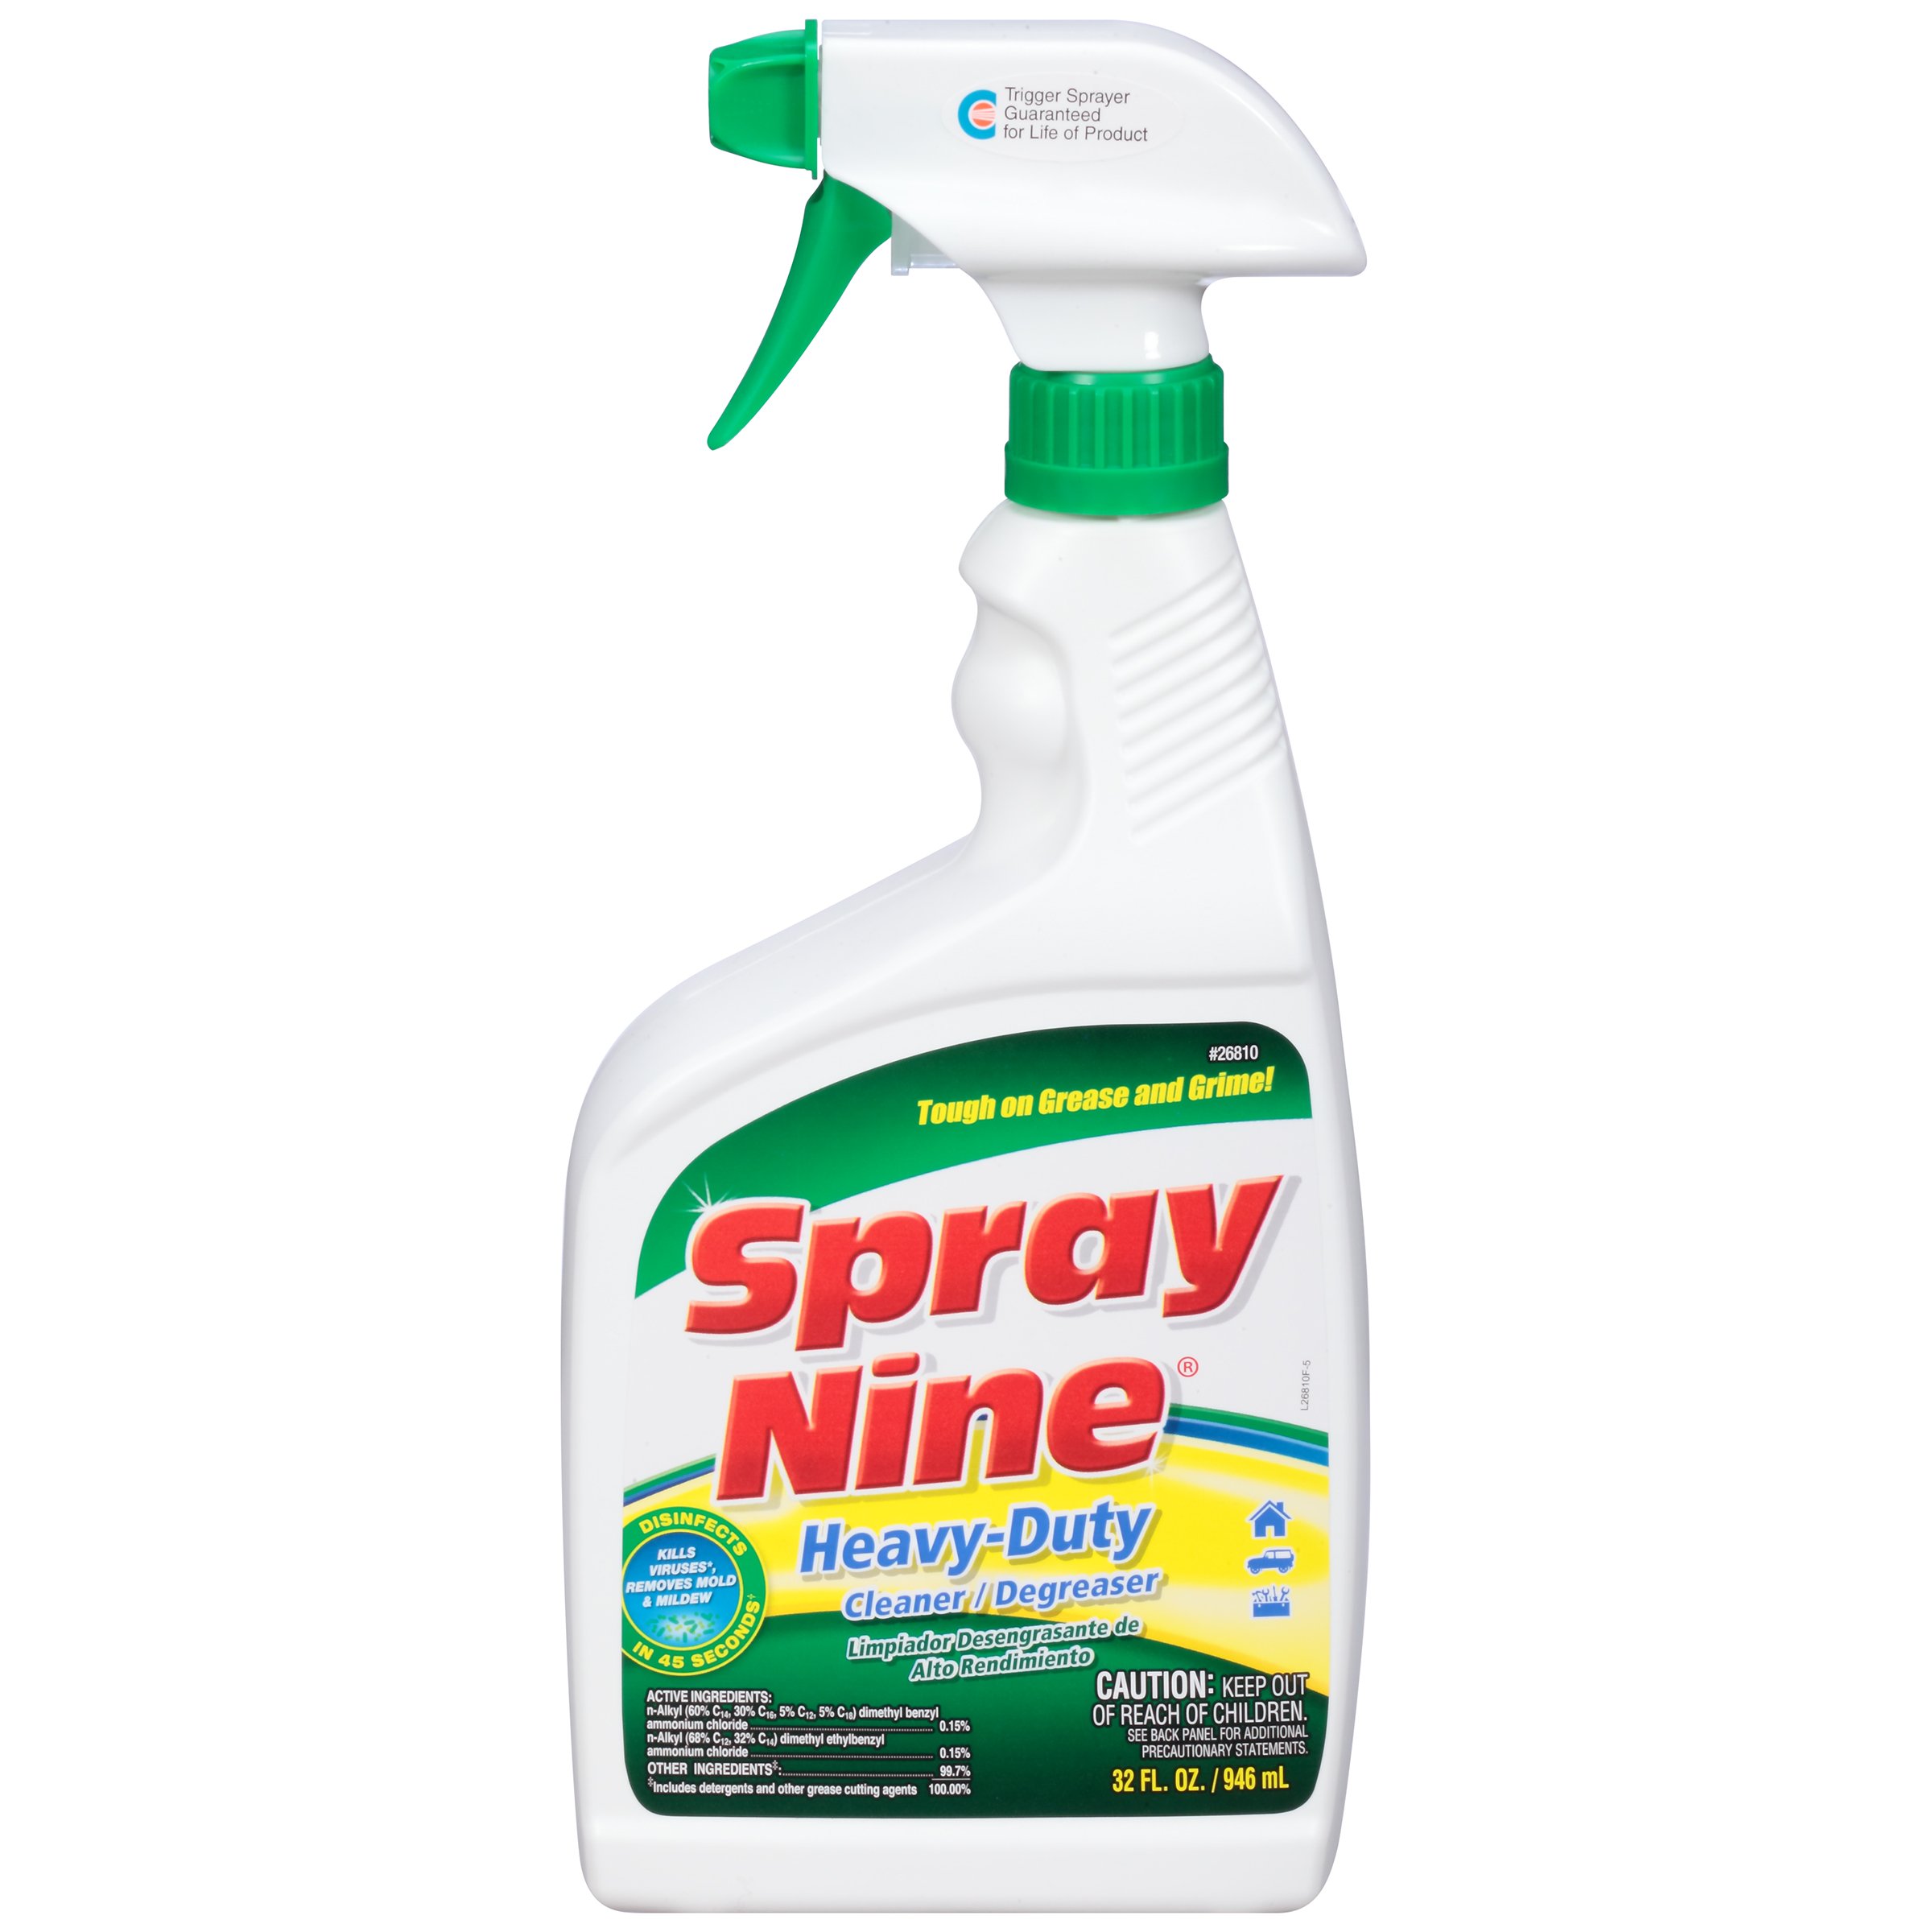 32-Oz Spray Nine Heavy Duty Cleaner/Degreaser & Disinfectant $4.48 + Free Shipping w/ Prime or on $25+